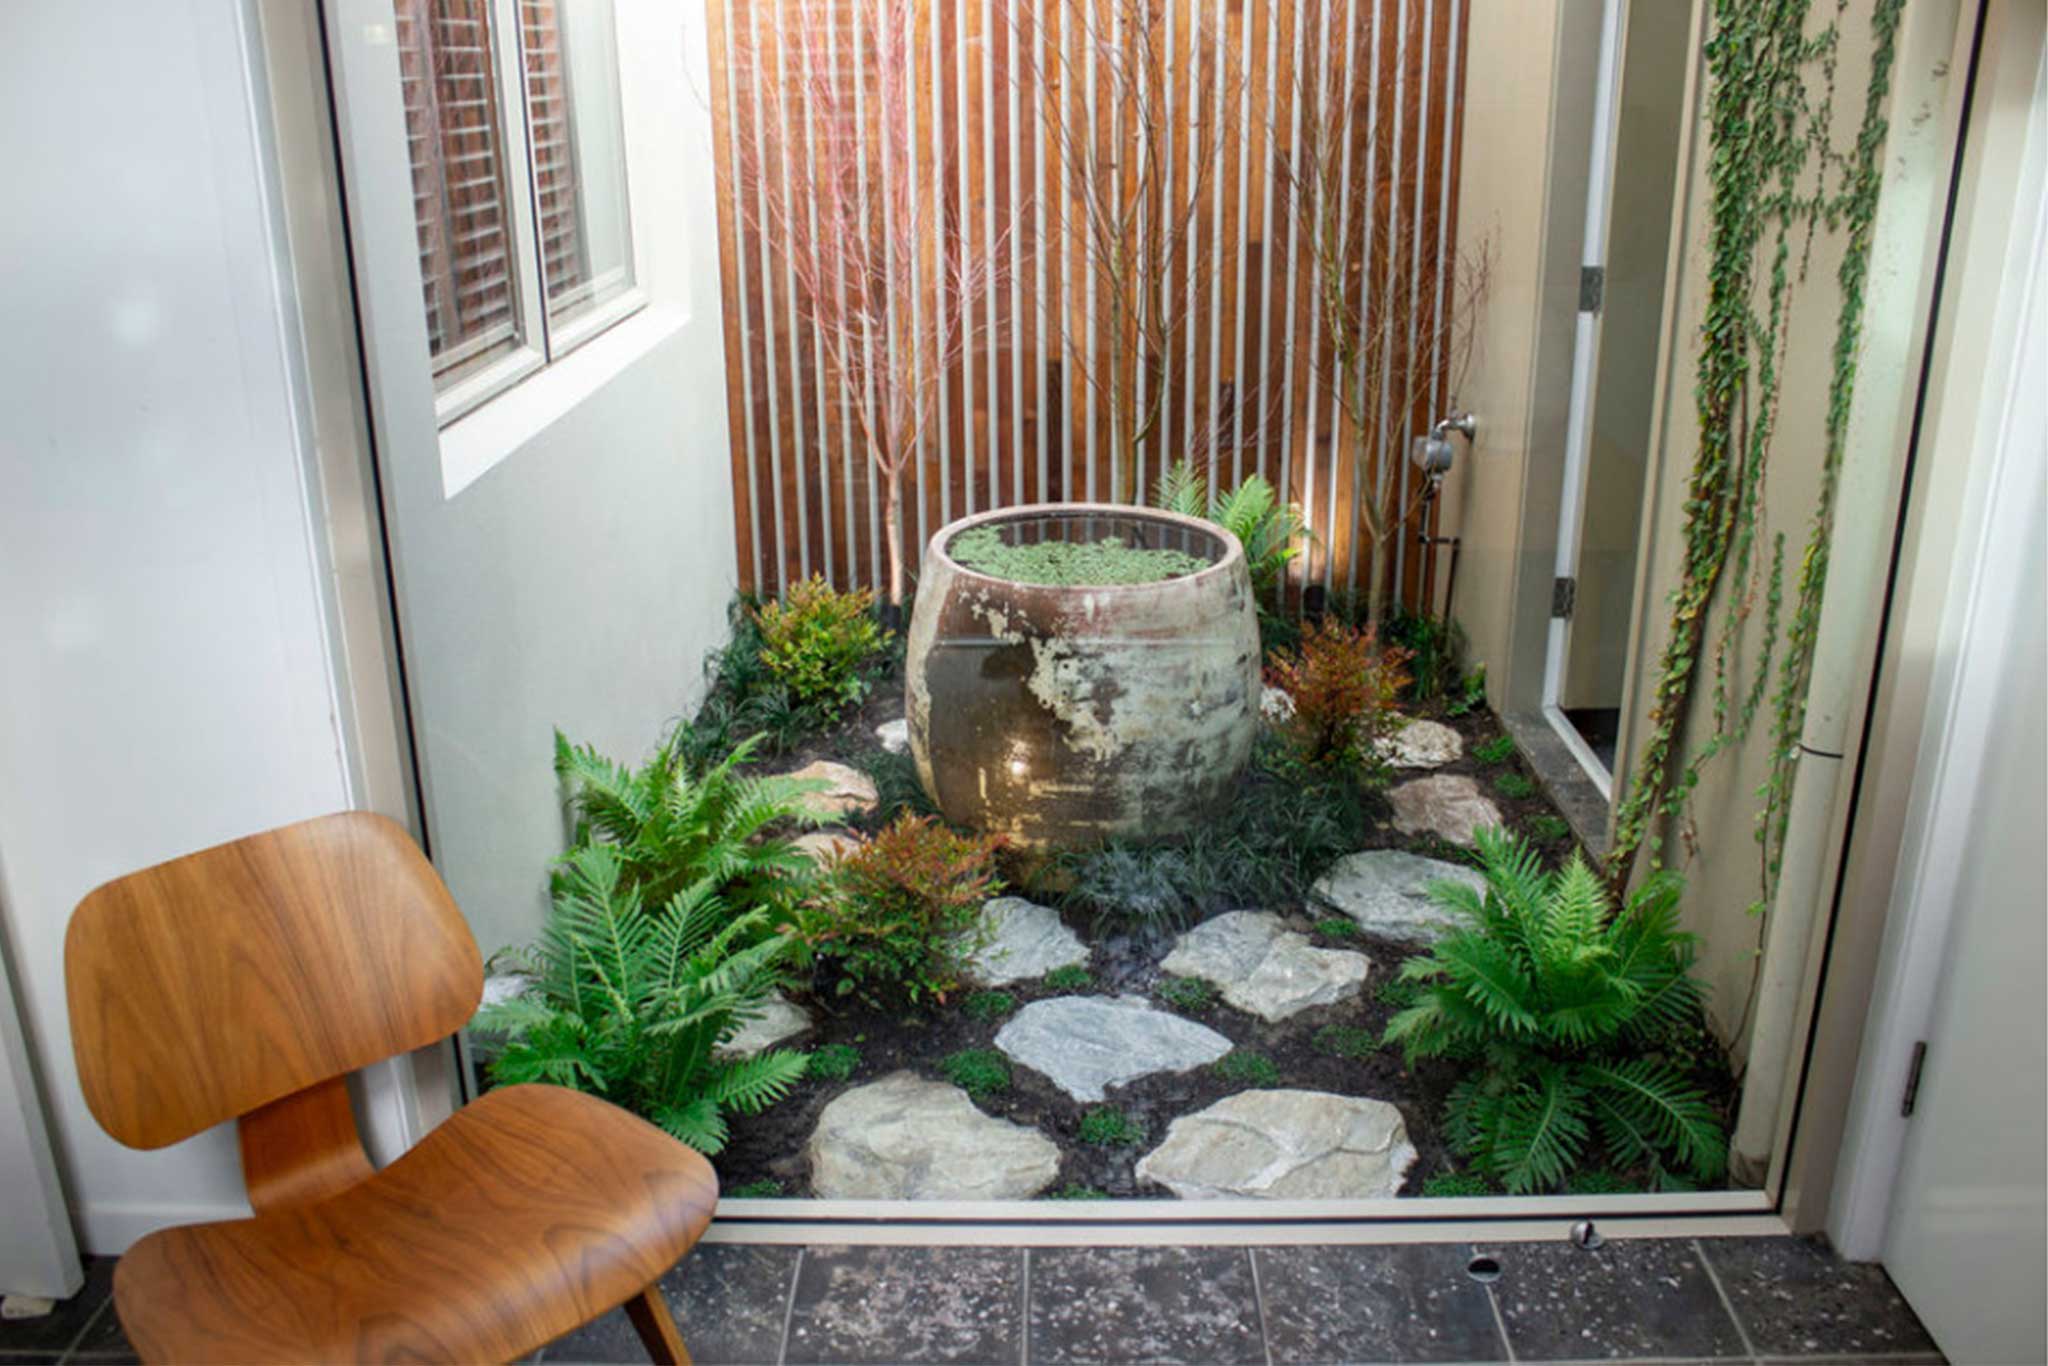 Landscape Design Construction Central Coast - Project "Nook Munday" - Atrium Courtyard from inside with urn water feature and planting